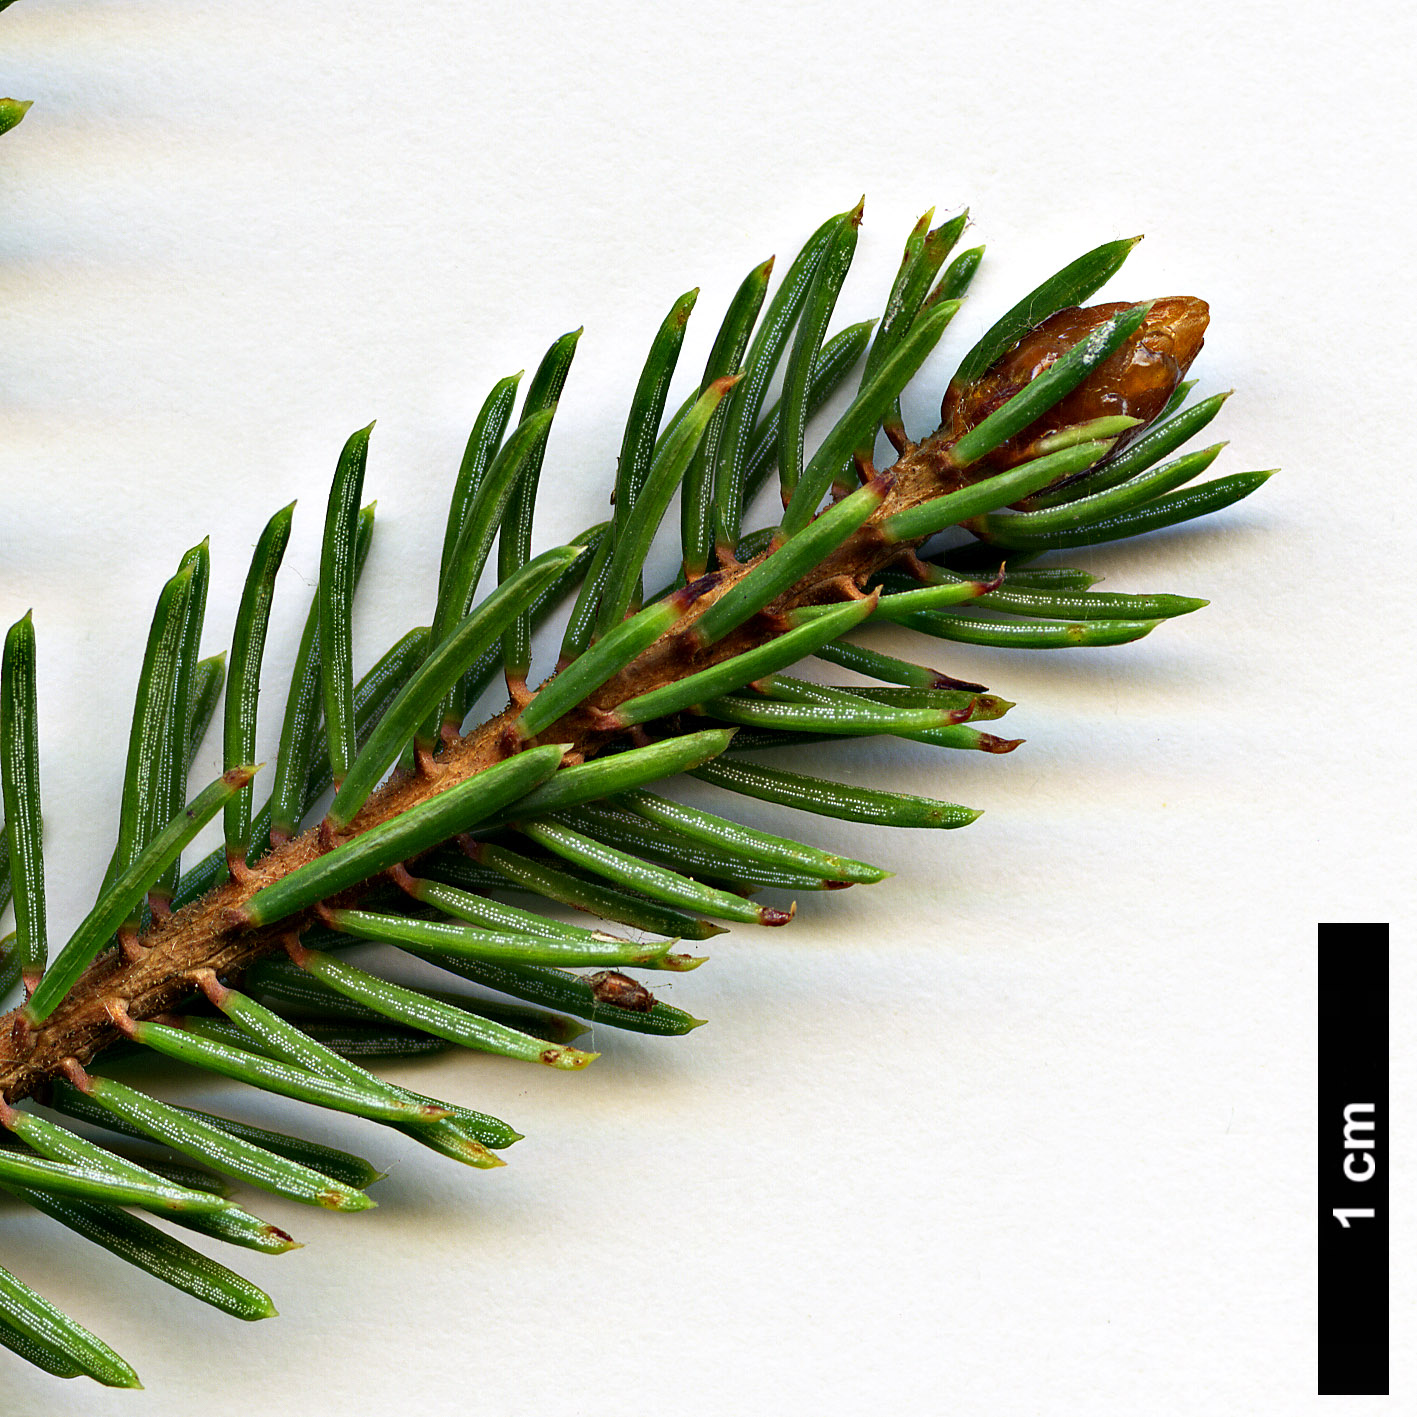 High resolution image: Family: Pinaceae - Genus: Picea - Taxon: linzhiensis